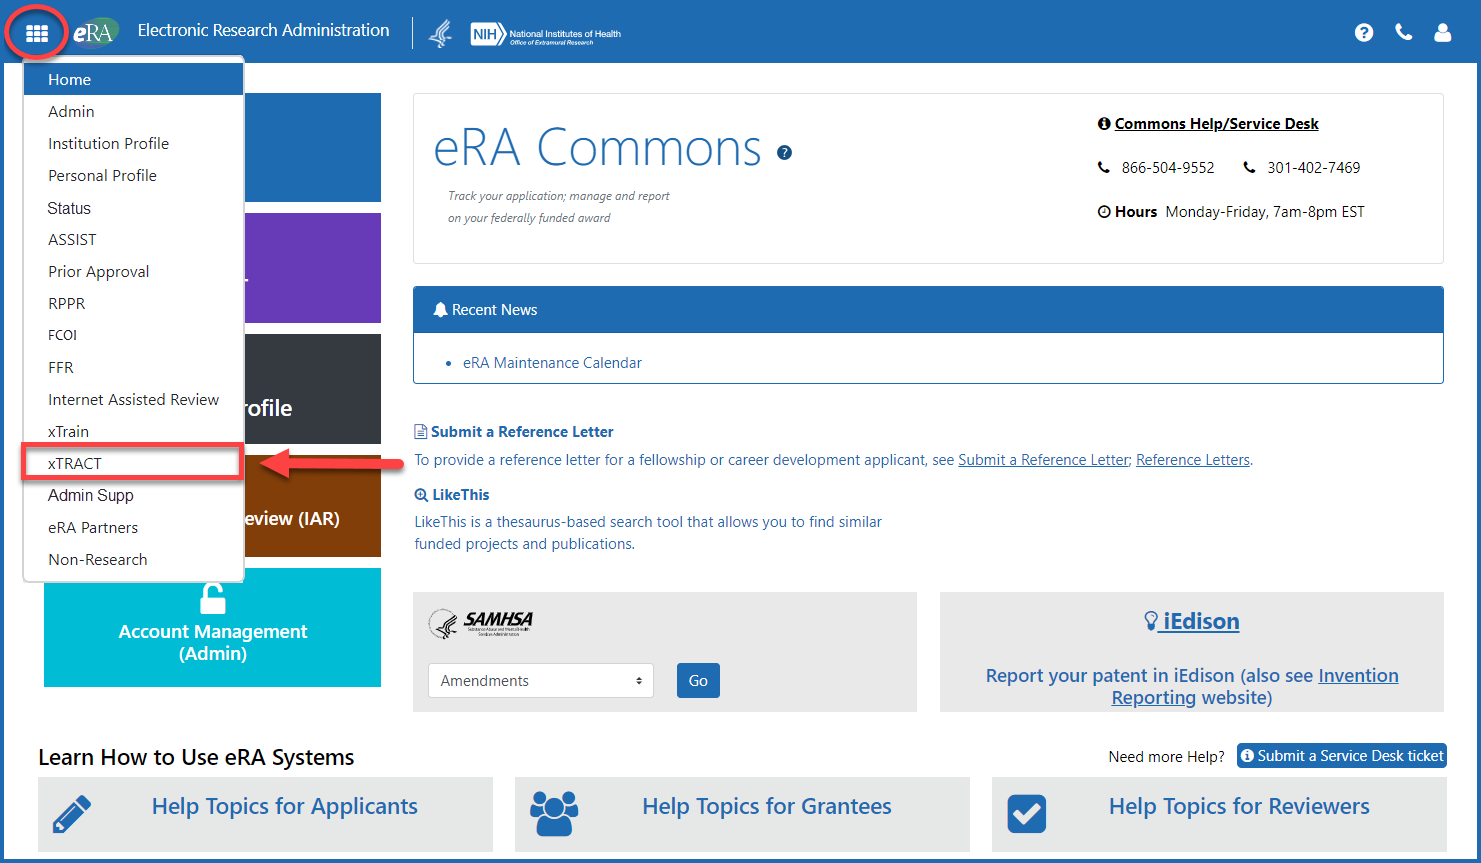 Figure 1: eRA Commons xTRACT option from the apps icon menu